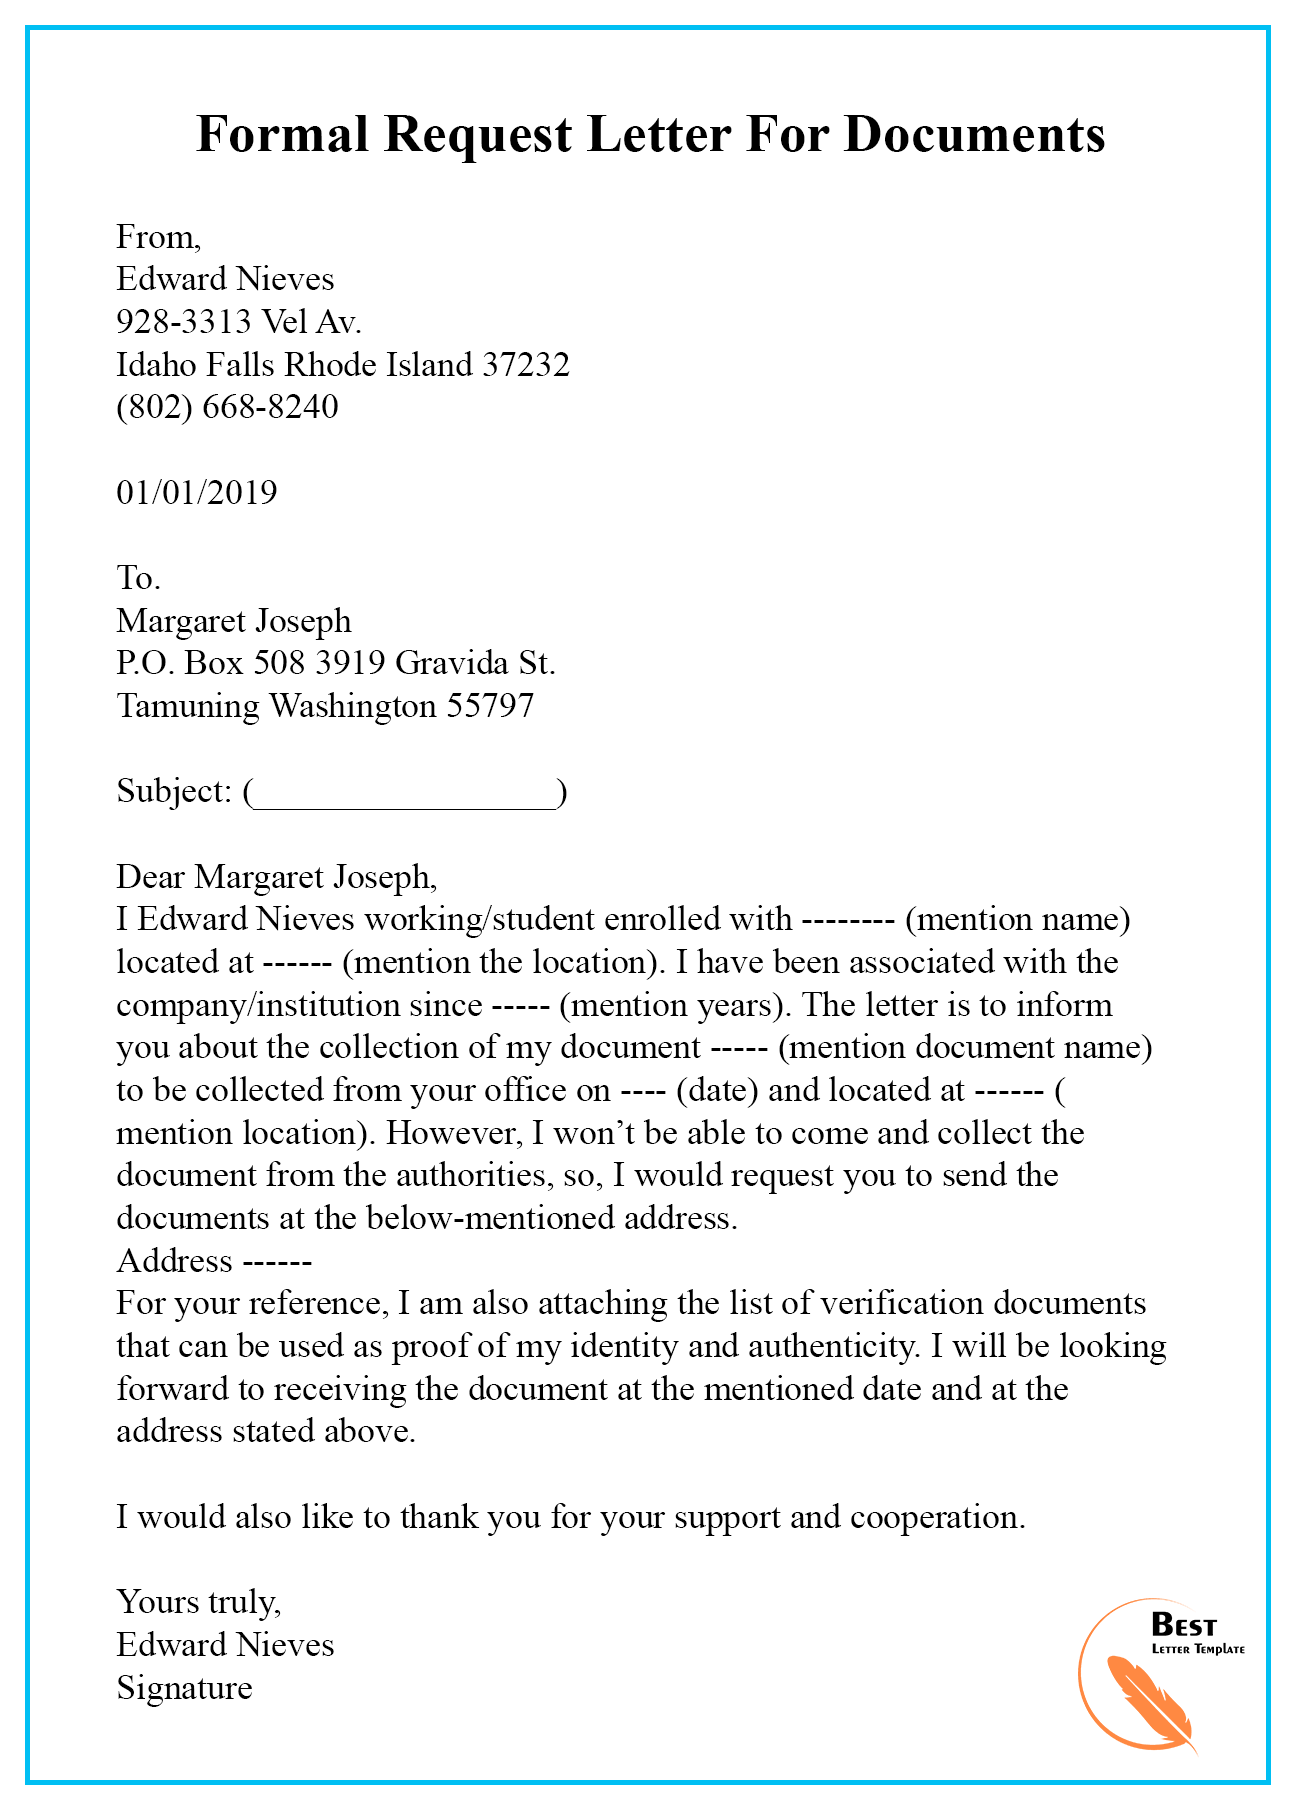 formal letter of request example